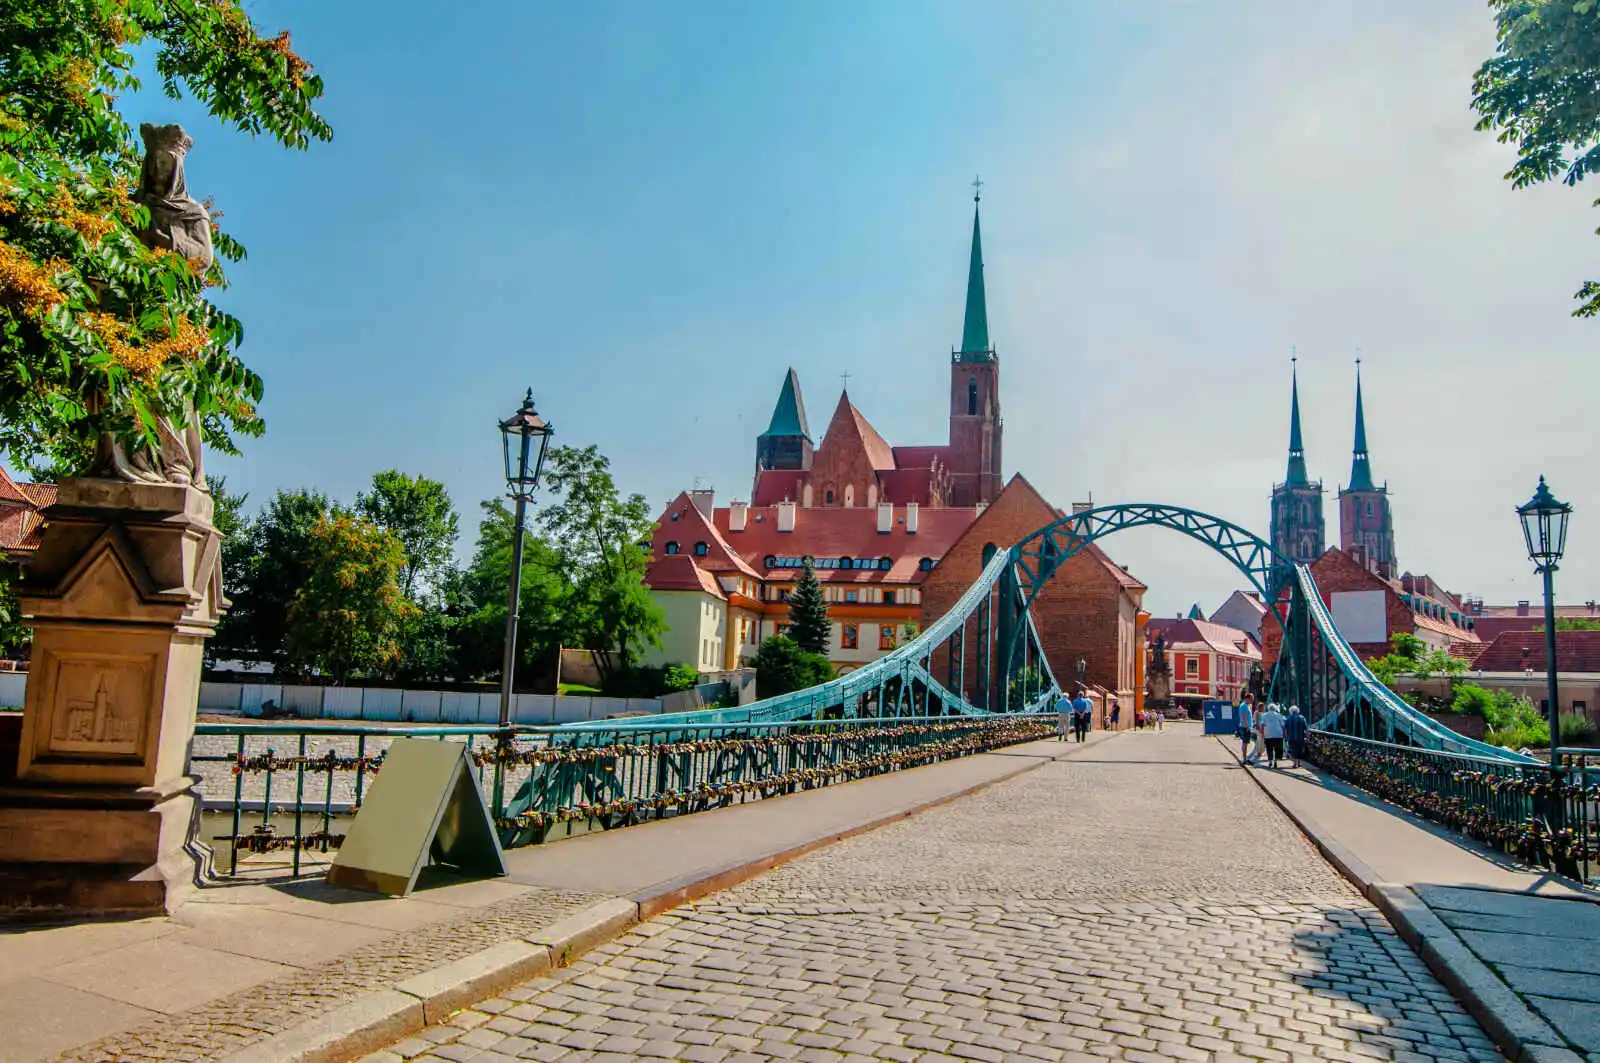 Wroclaw, Pologne